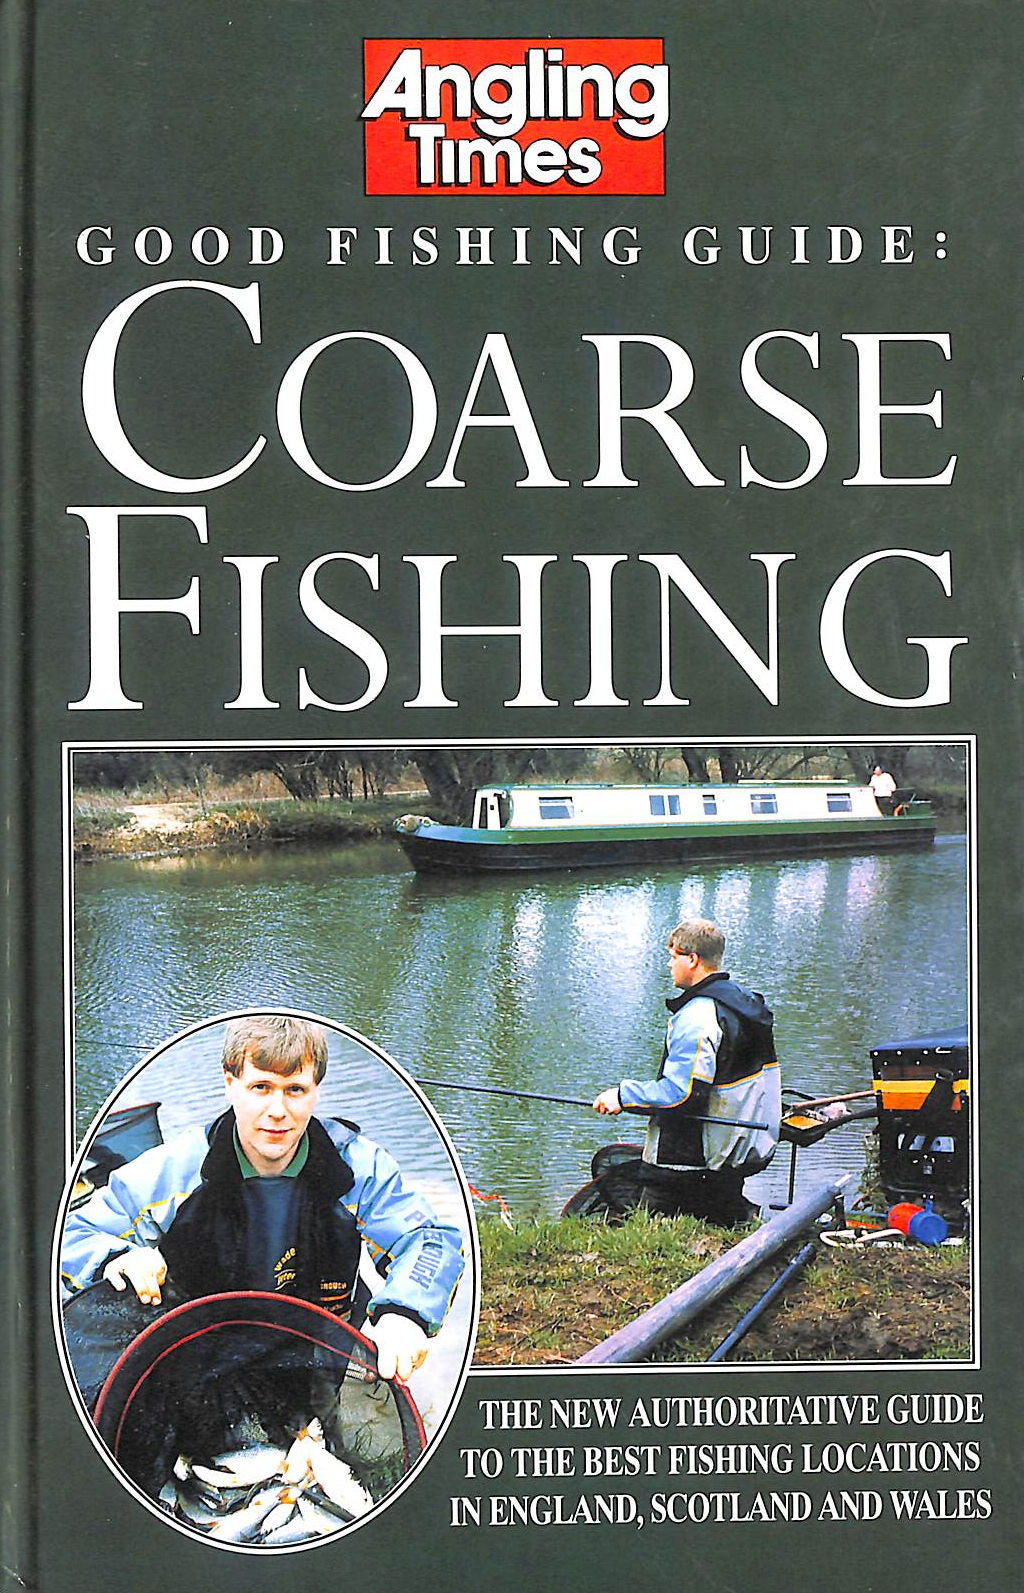 Legering and Feeder Fishing (Beekay's successful angling series)